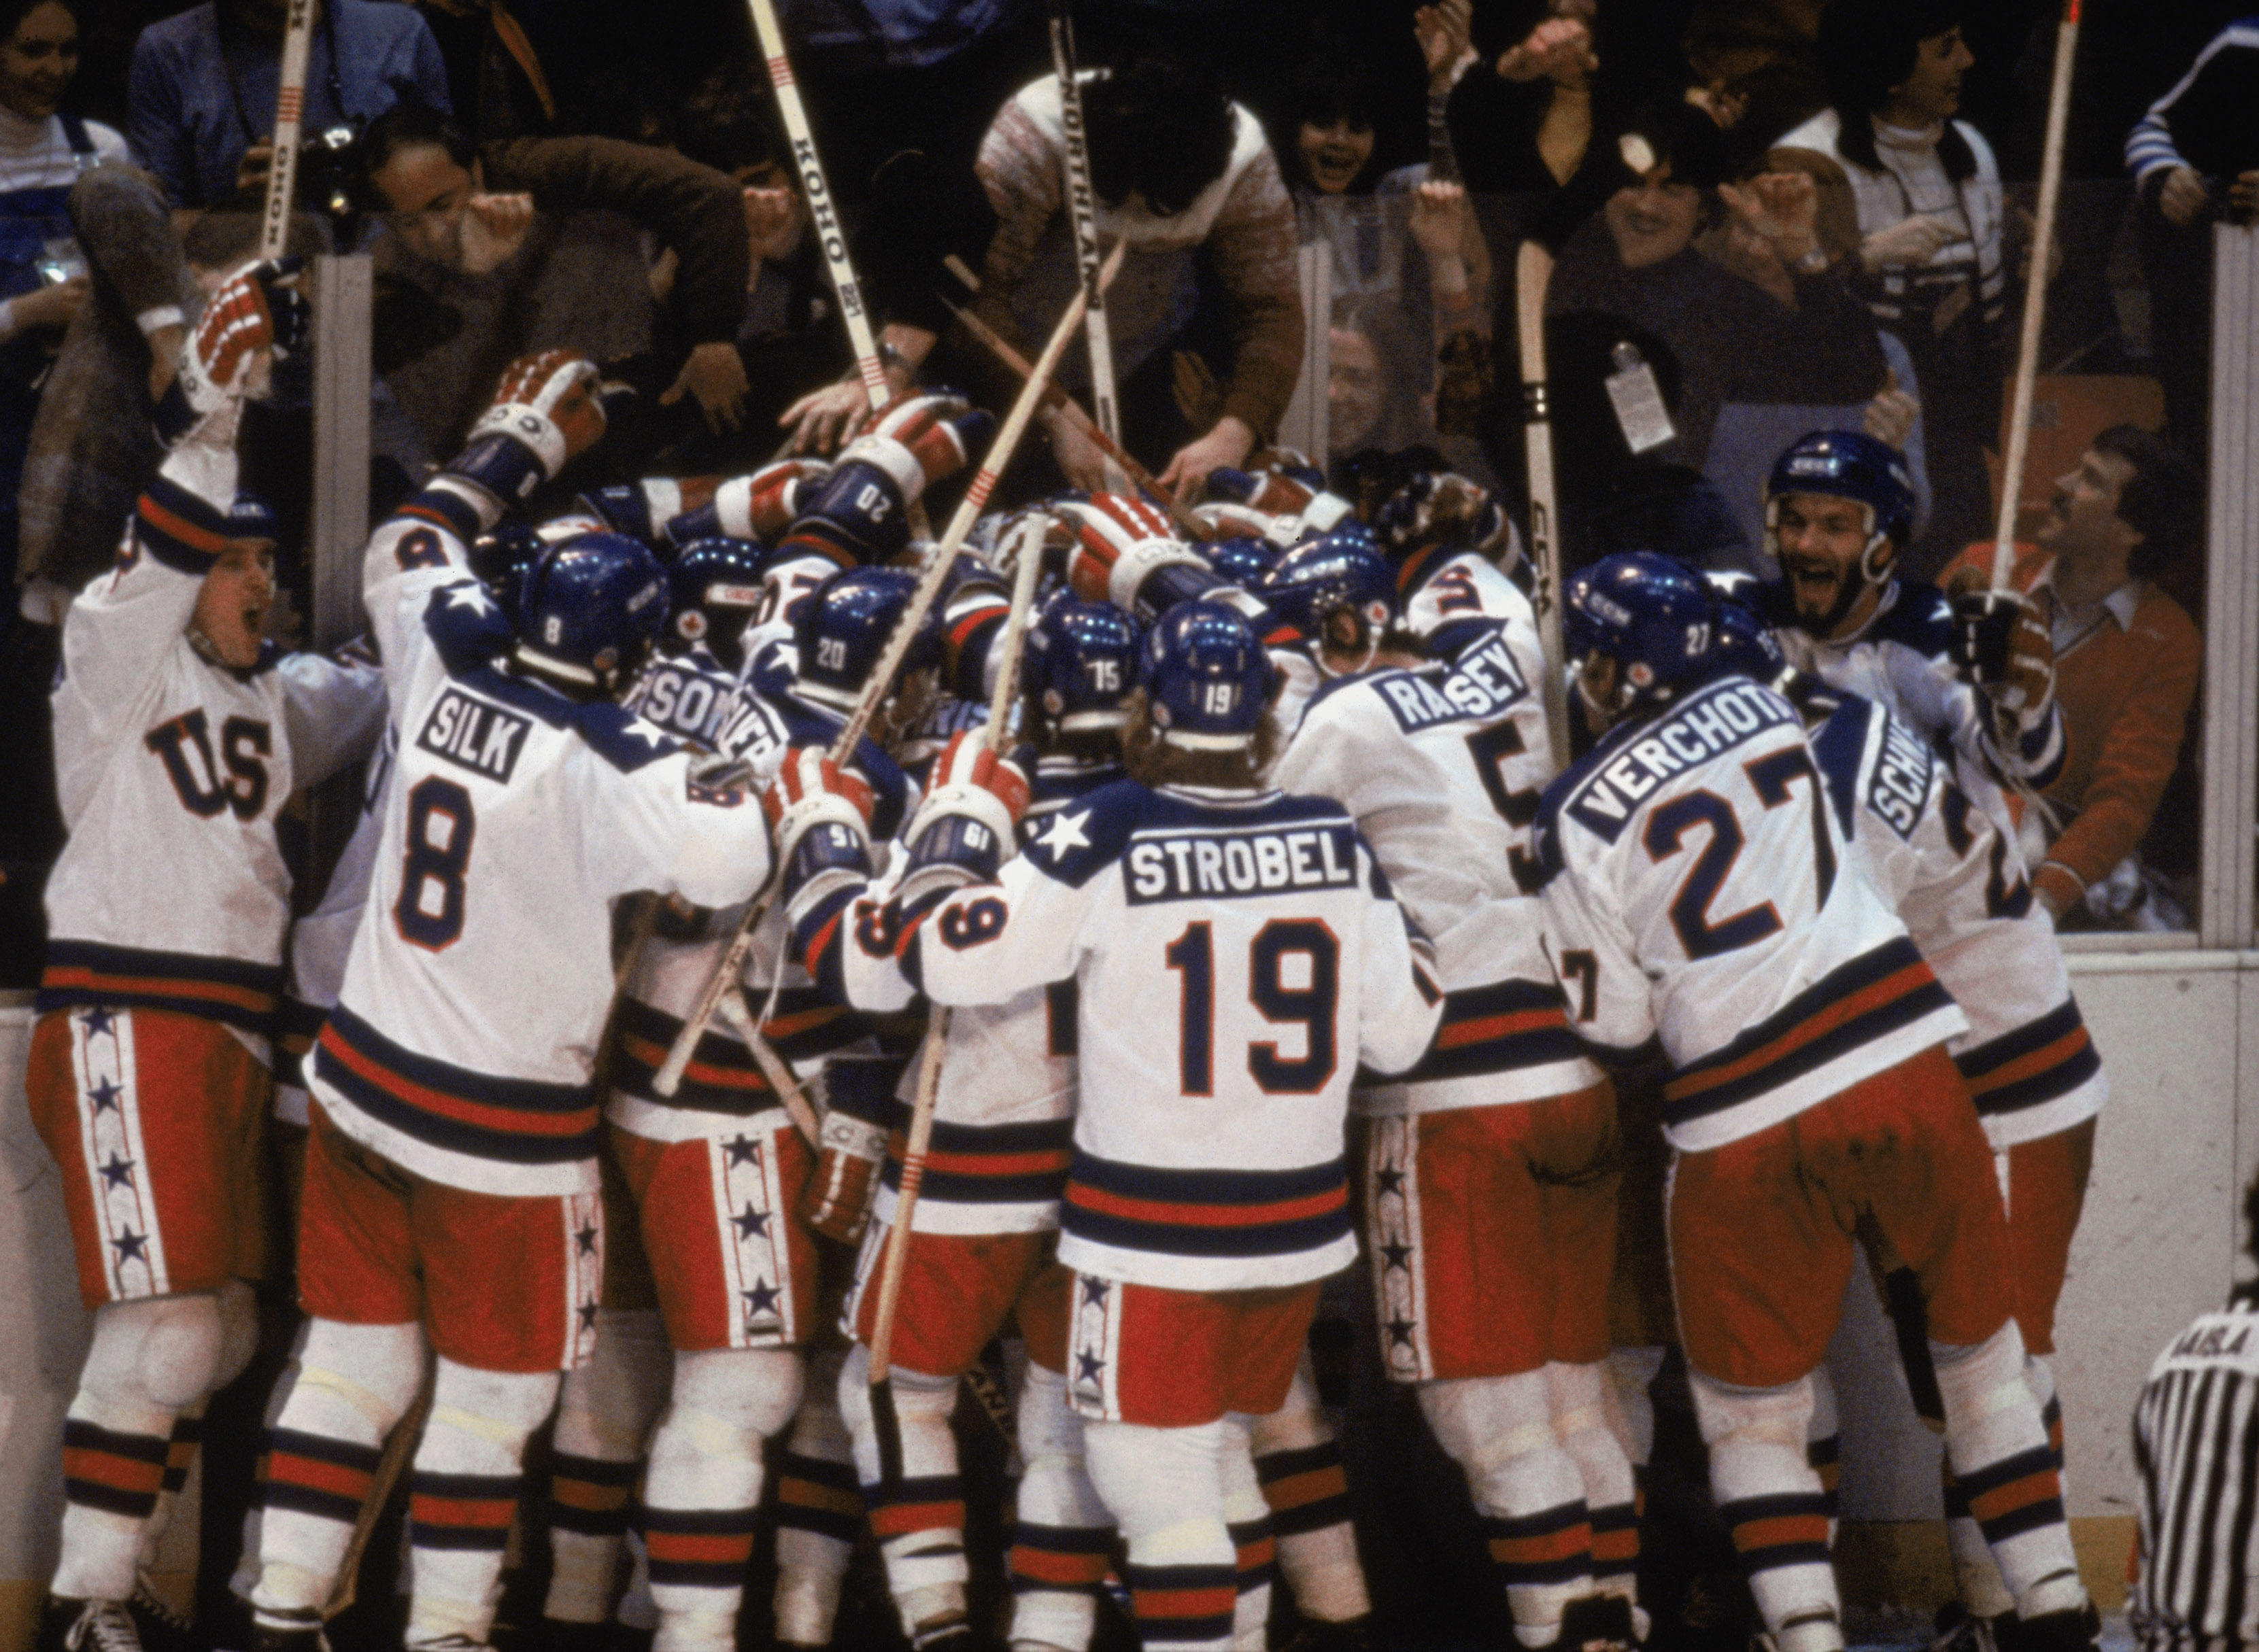 1980 US Olympic hockey team to relive Miracle on Ice moment kare11